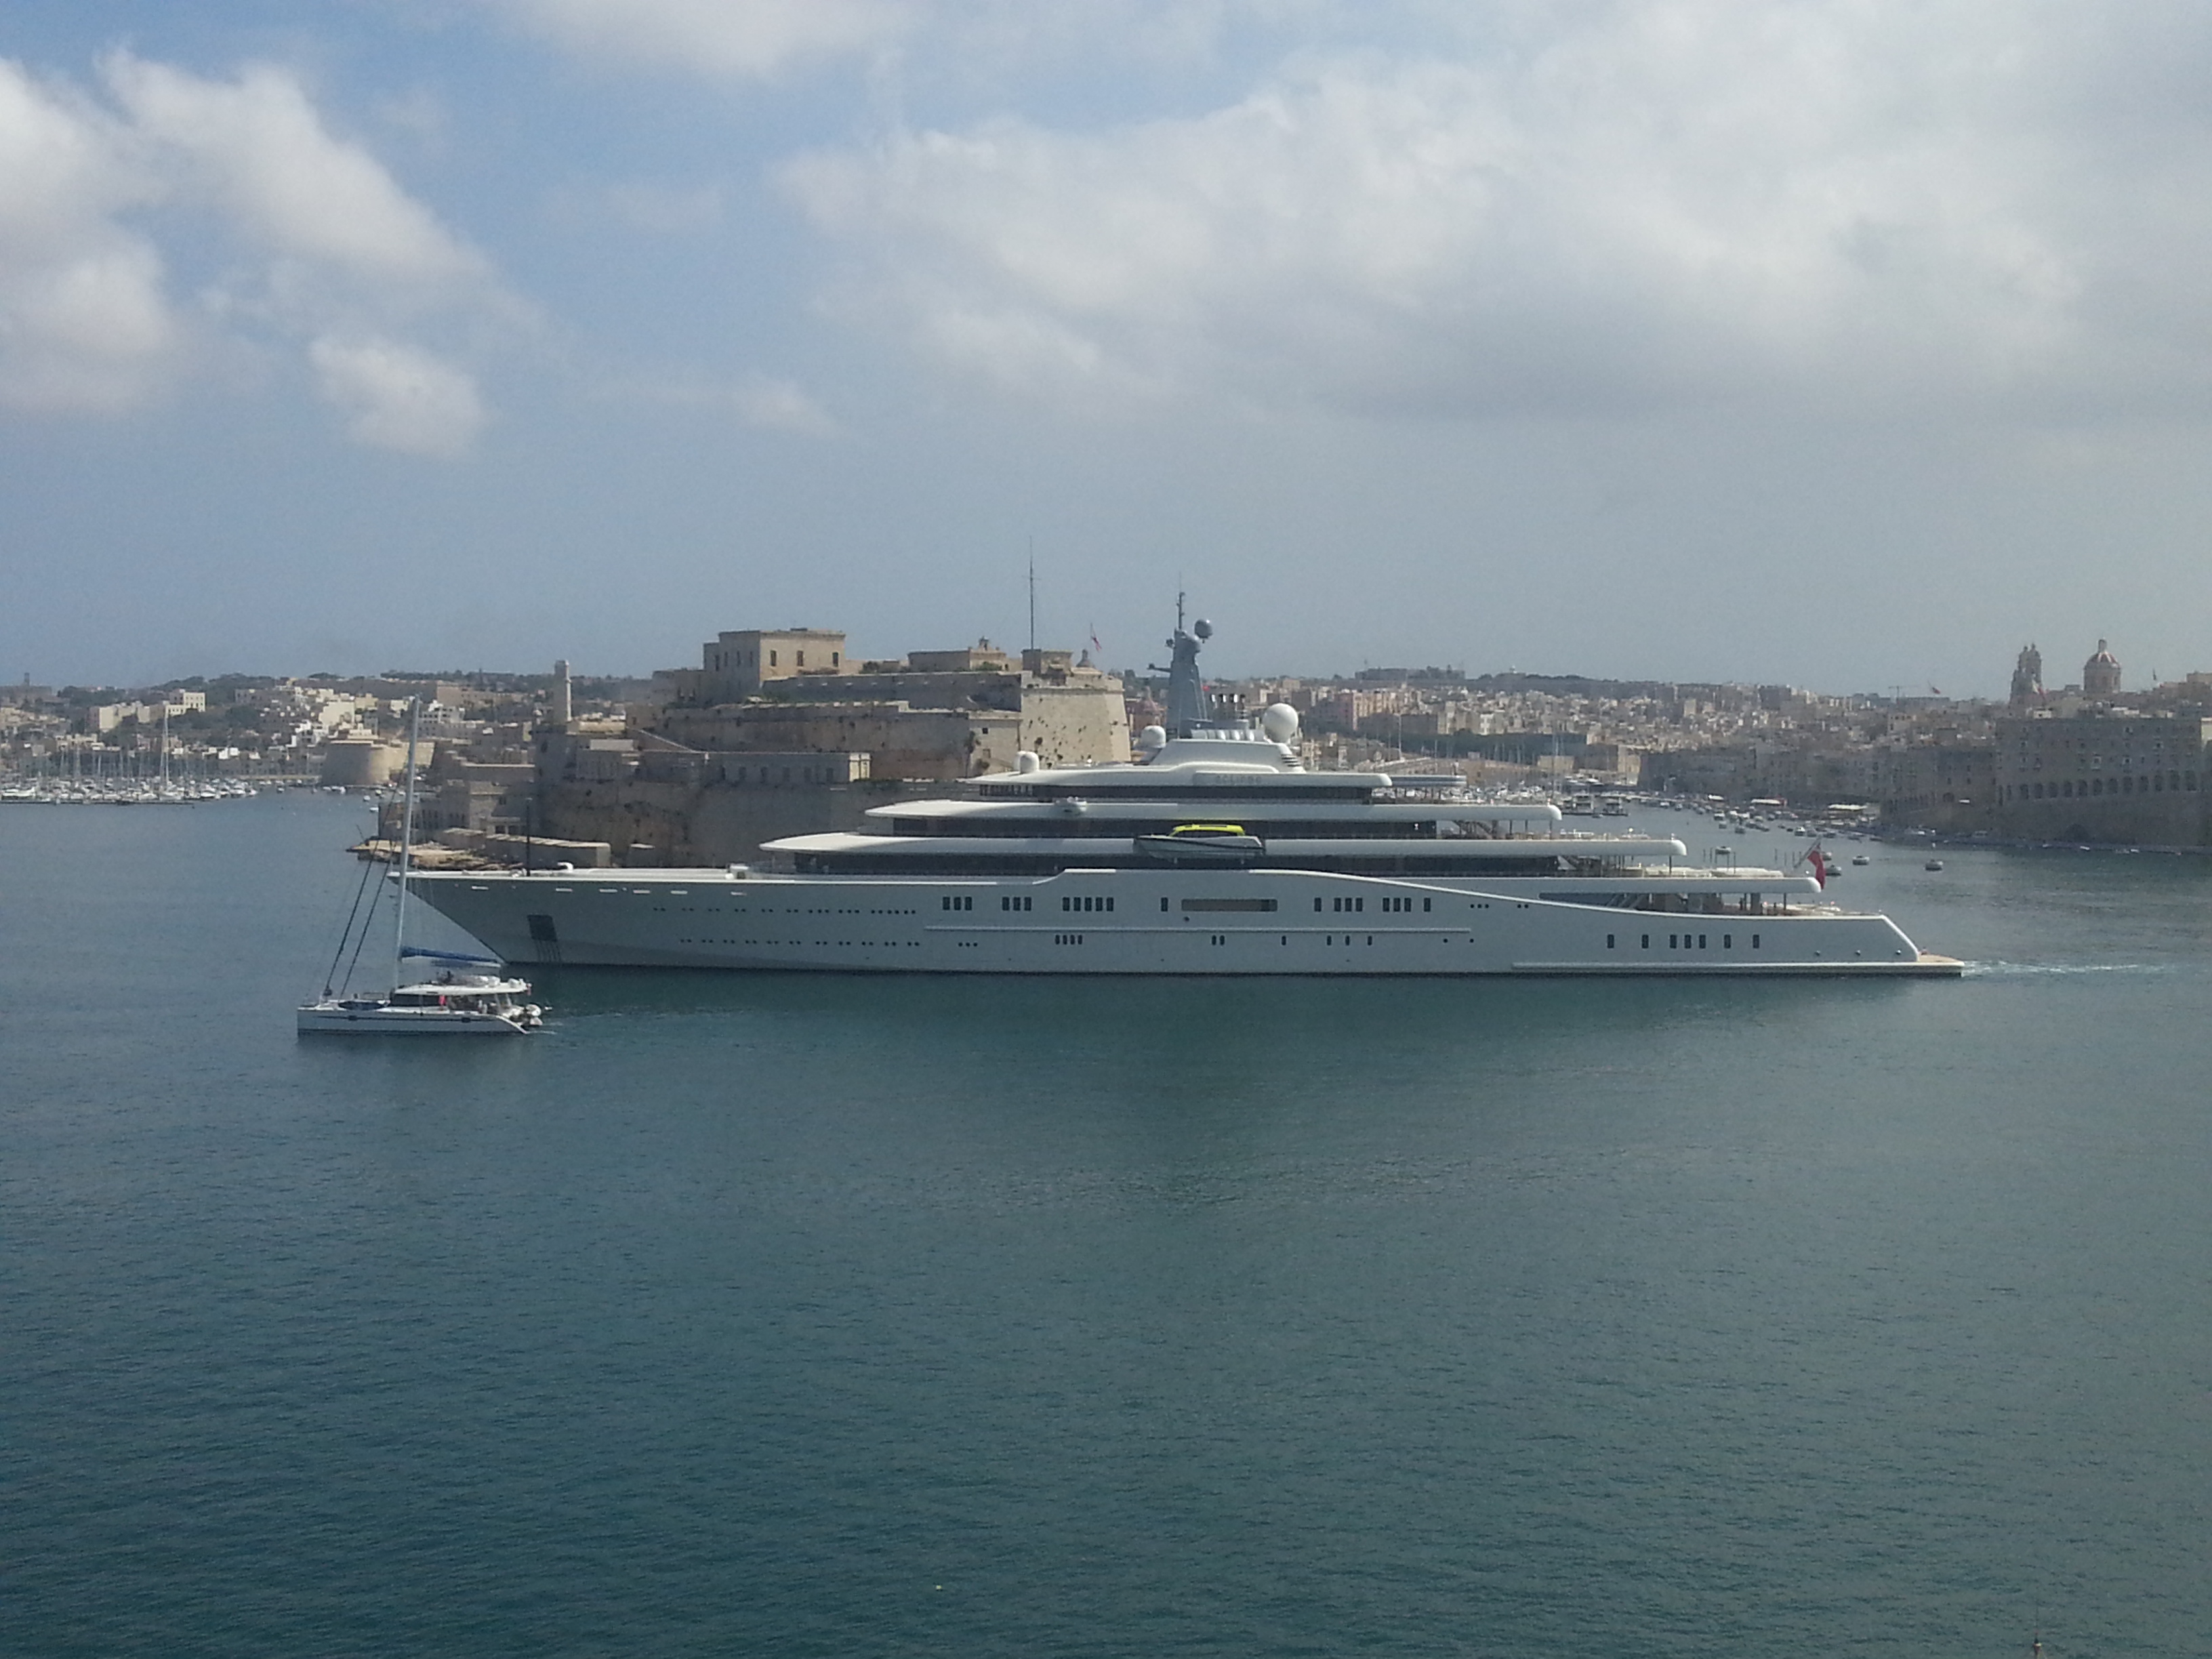 Malta to become yachting hotspot in Mediterranean